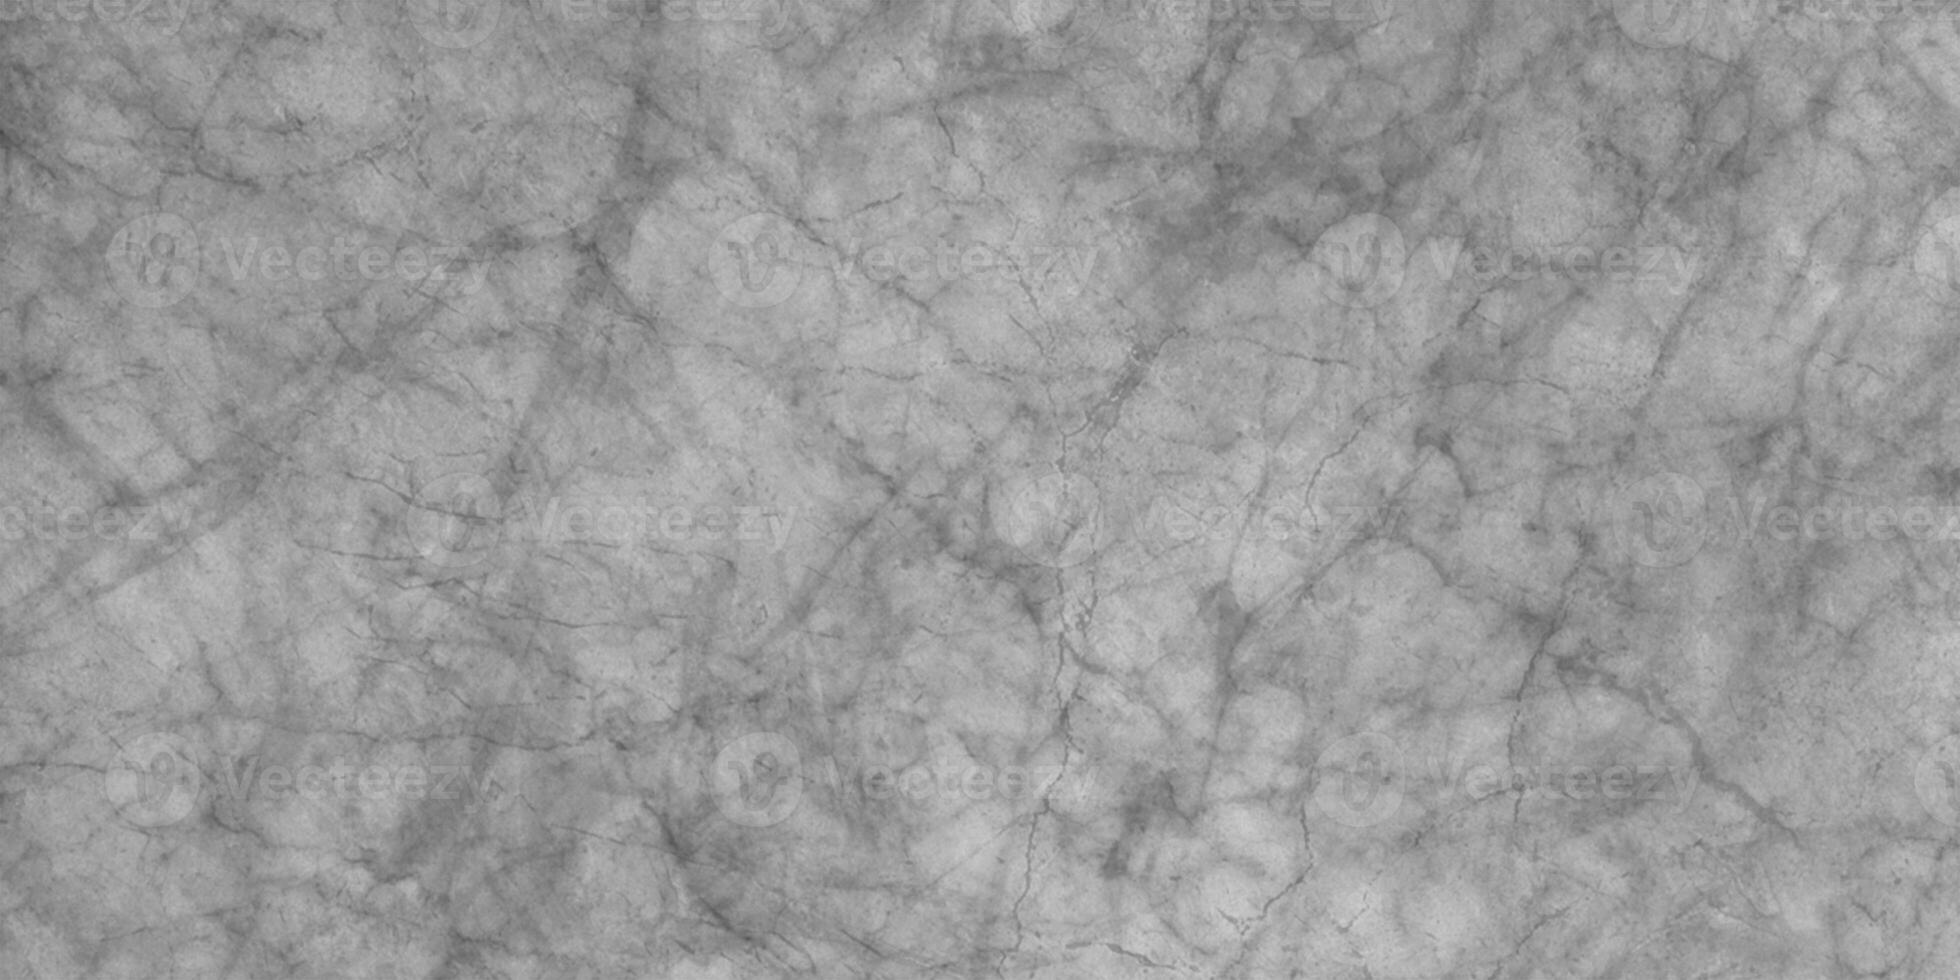 White wall texture with grainy and grunge stains, Old and dusty white grunge texture, Abstract grunge black and white background, Abstract white marble background with stains. photo